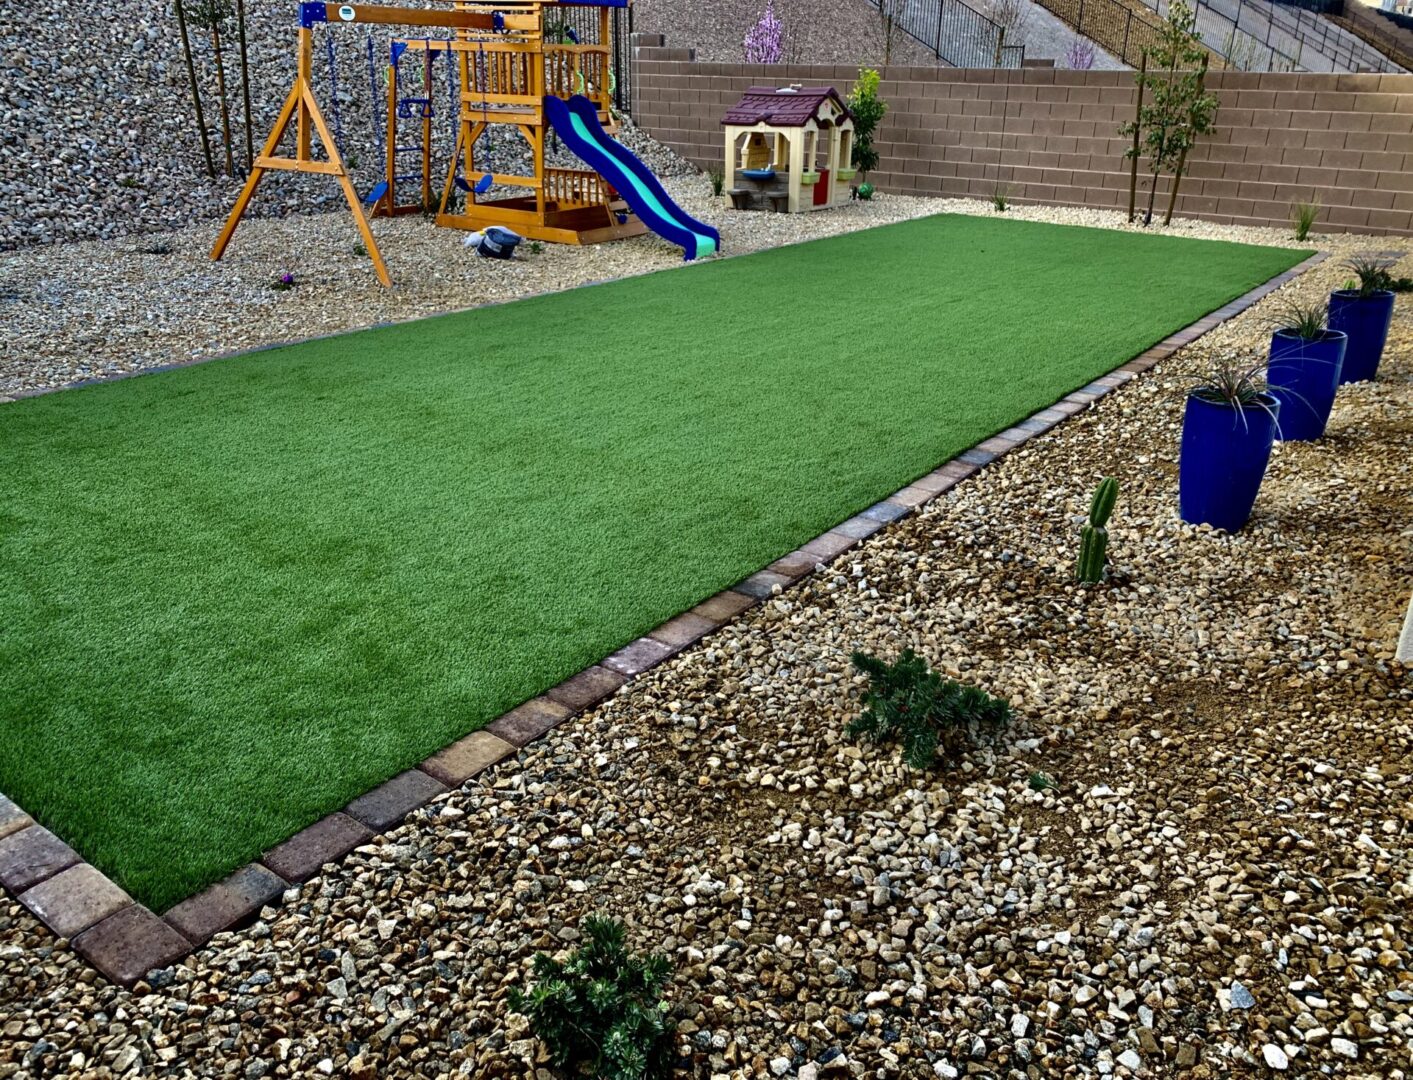 A backyard with a slide, sandpit and grass.